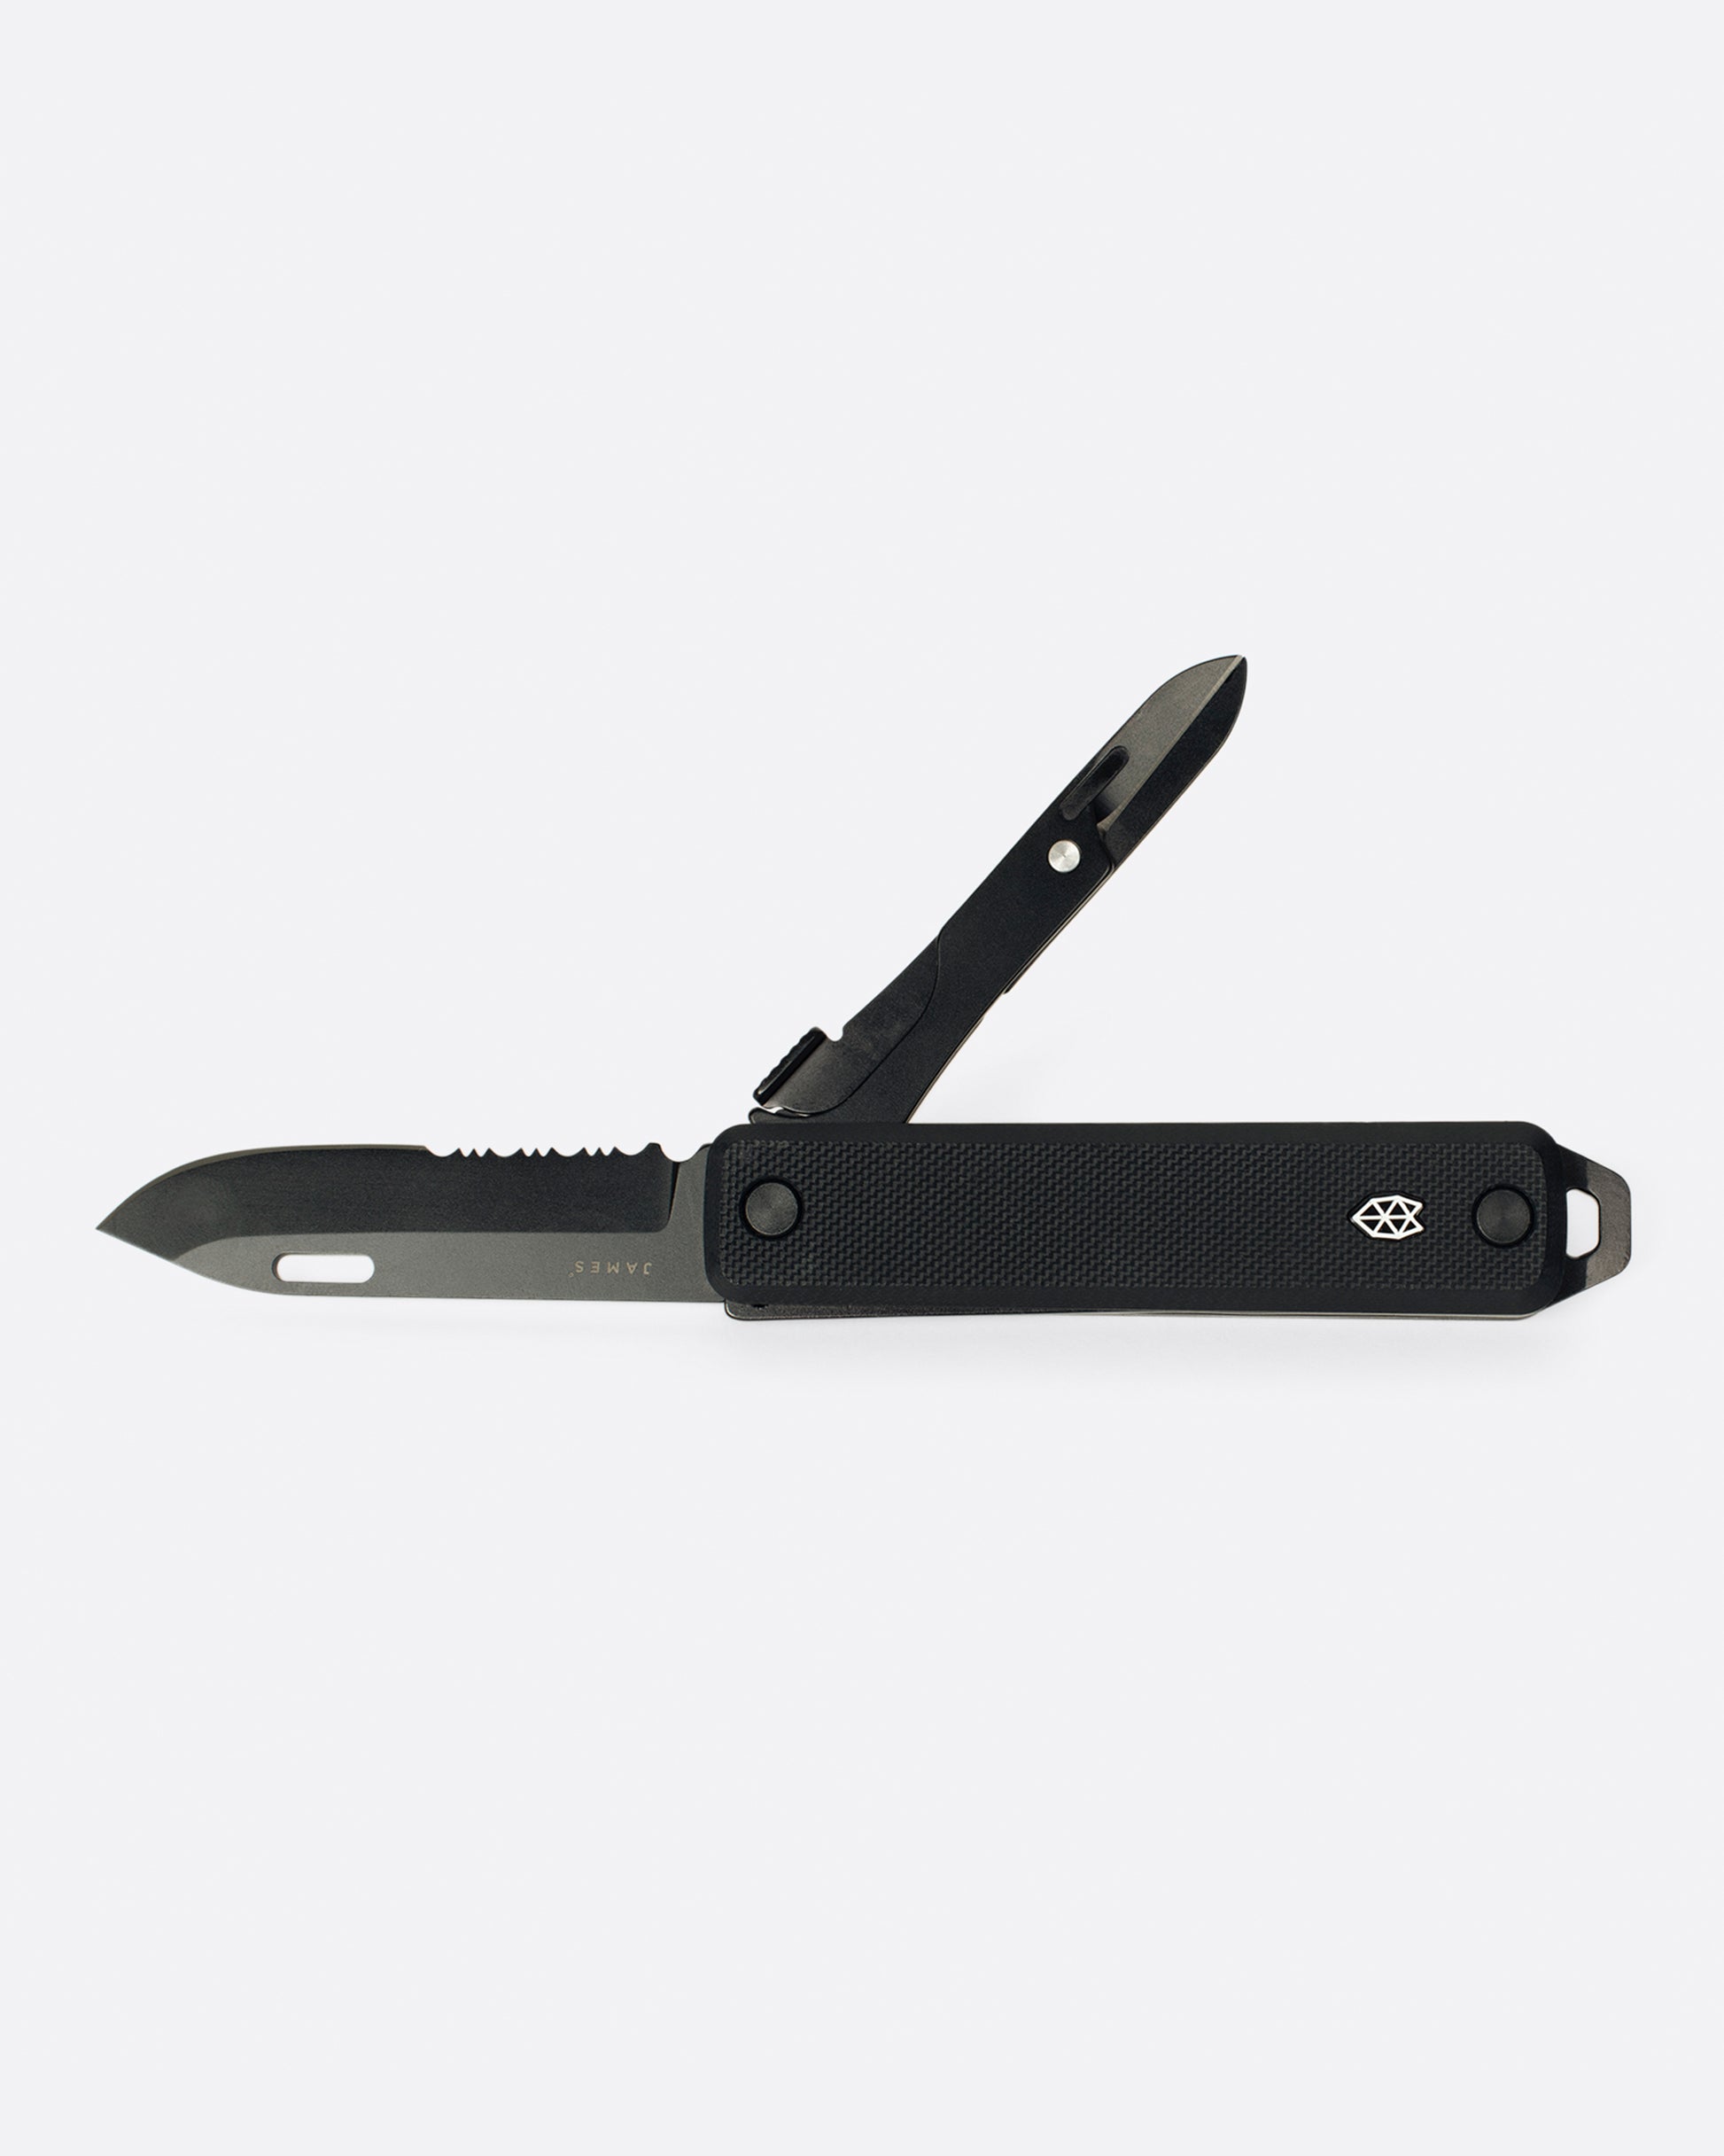 An all black pocket knife with a scissor attachment, shown open.